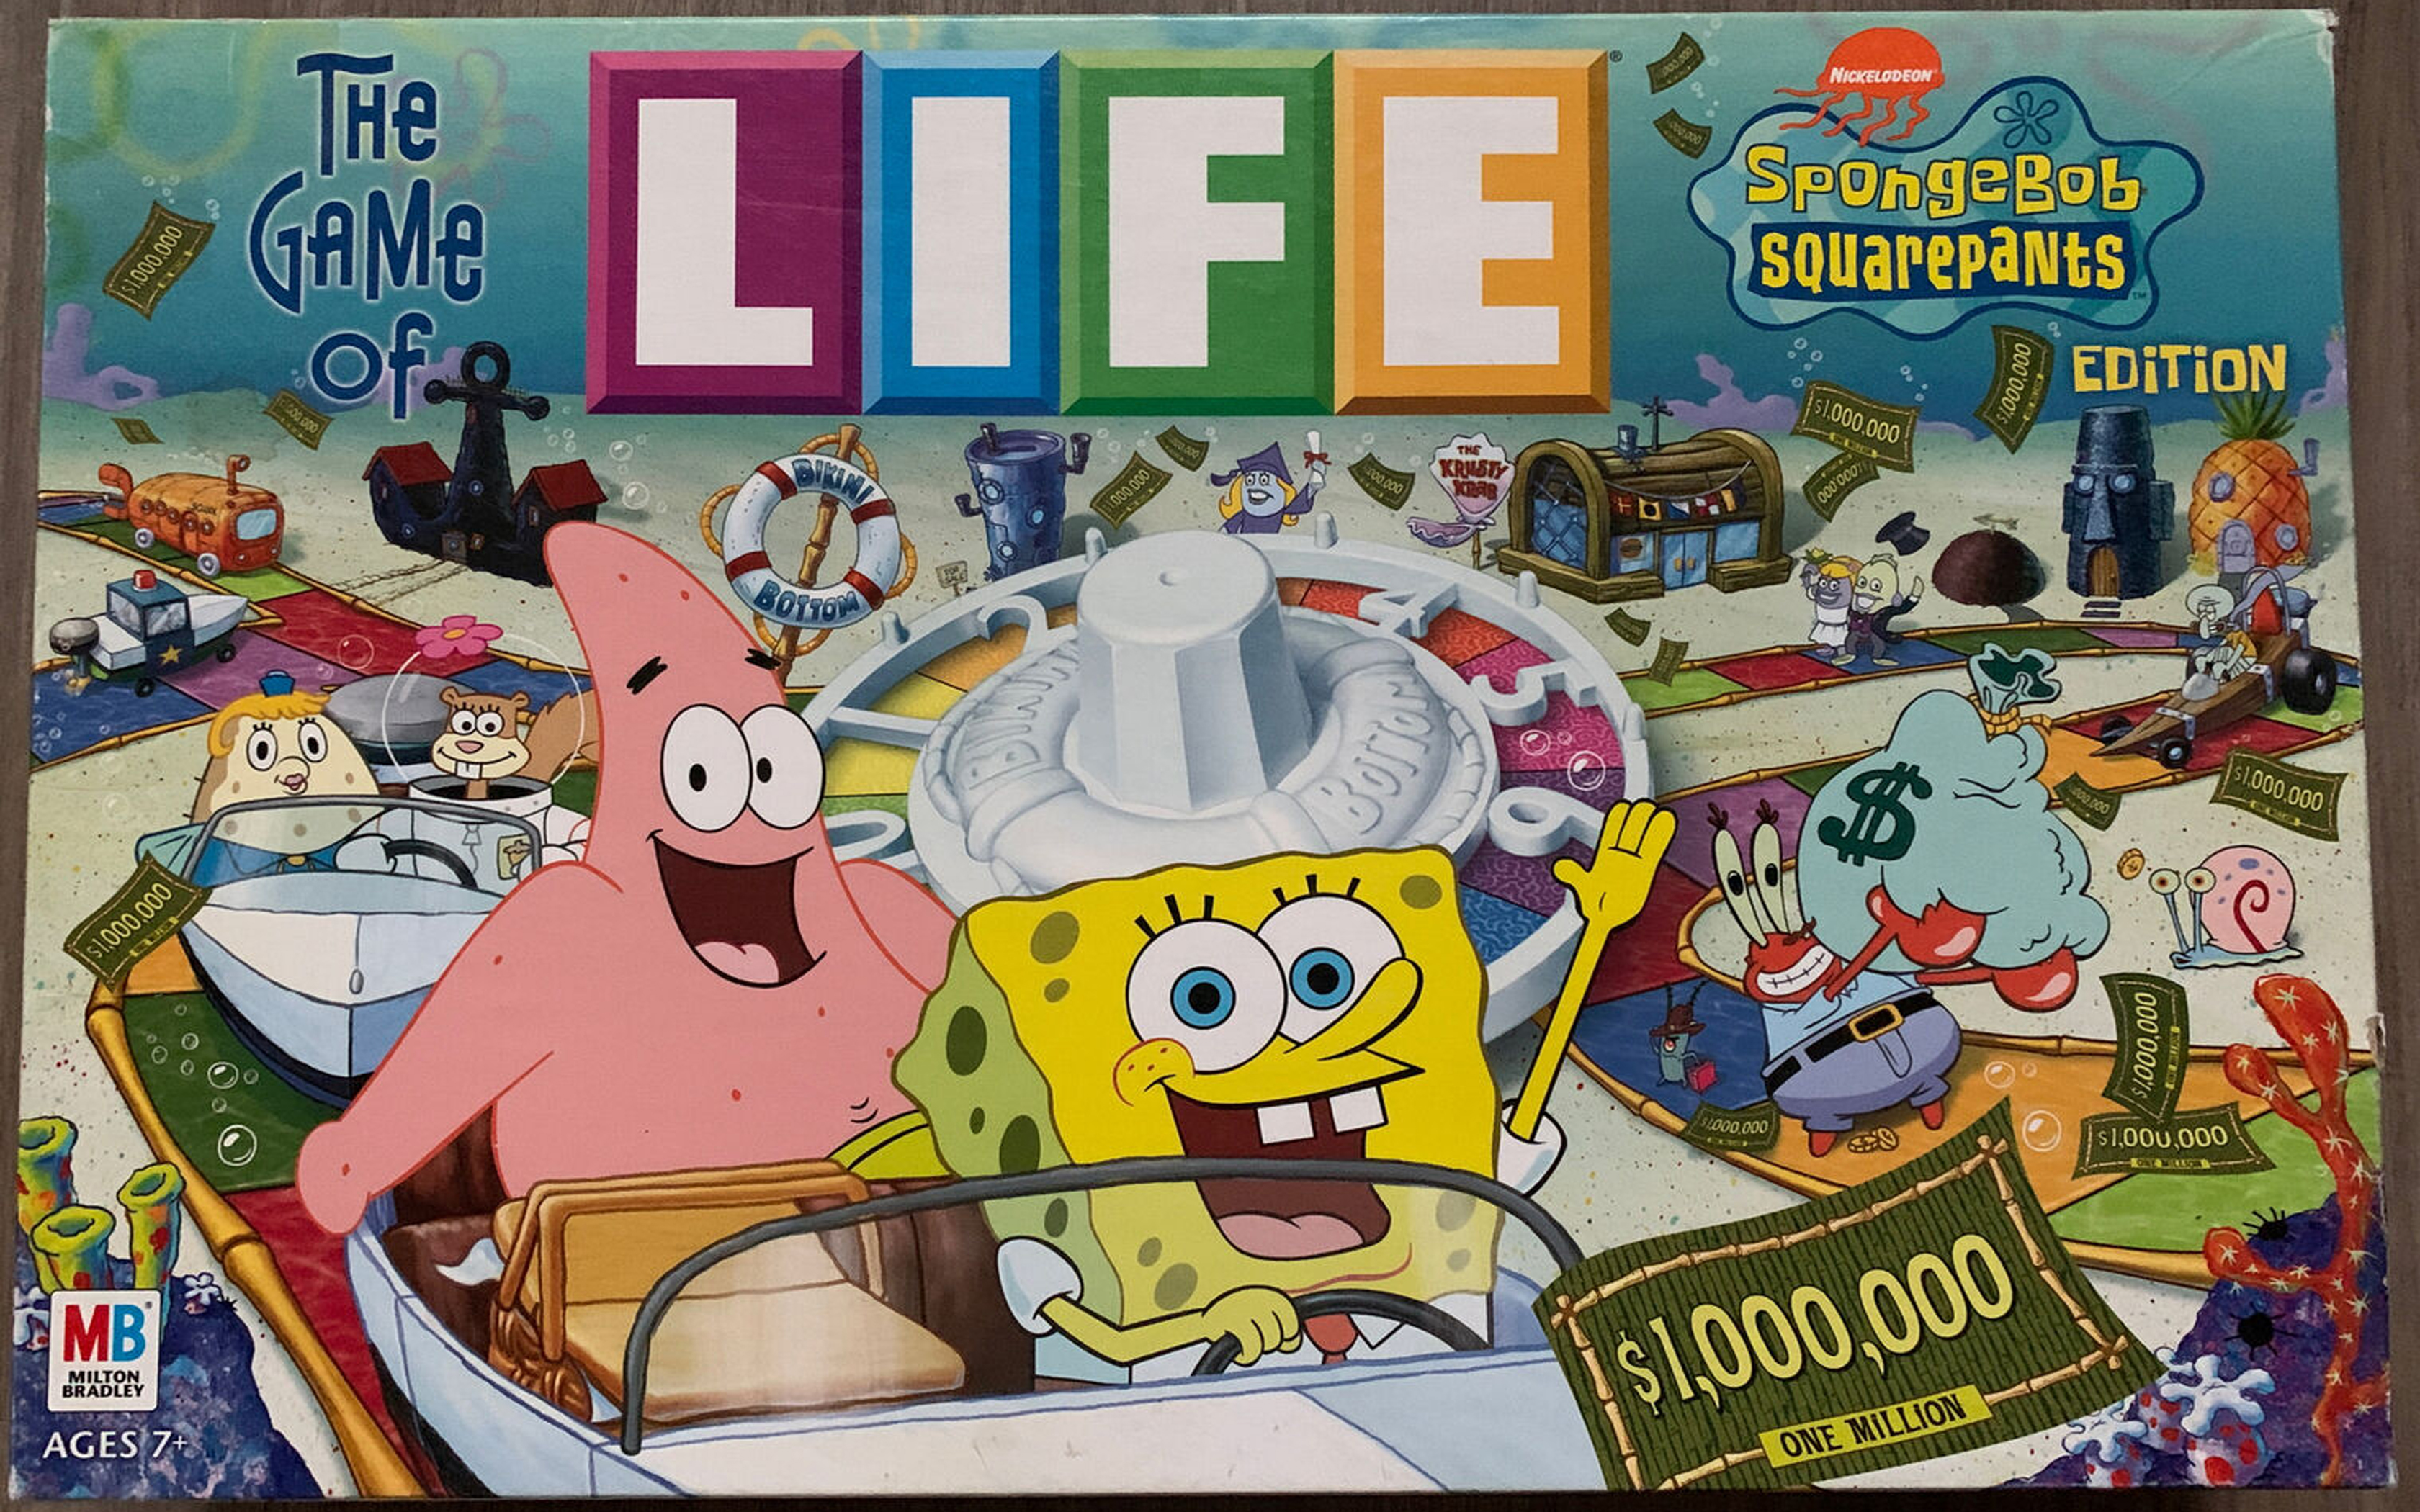 Buy The Game of Life Game by Hasbro Gaming Online at Best Price in